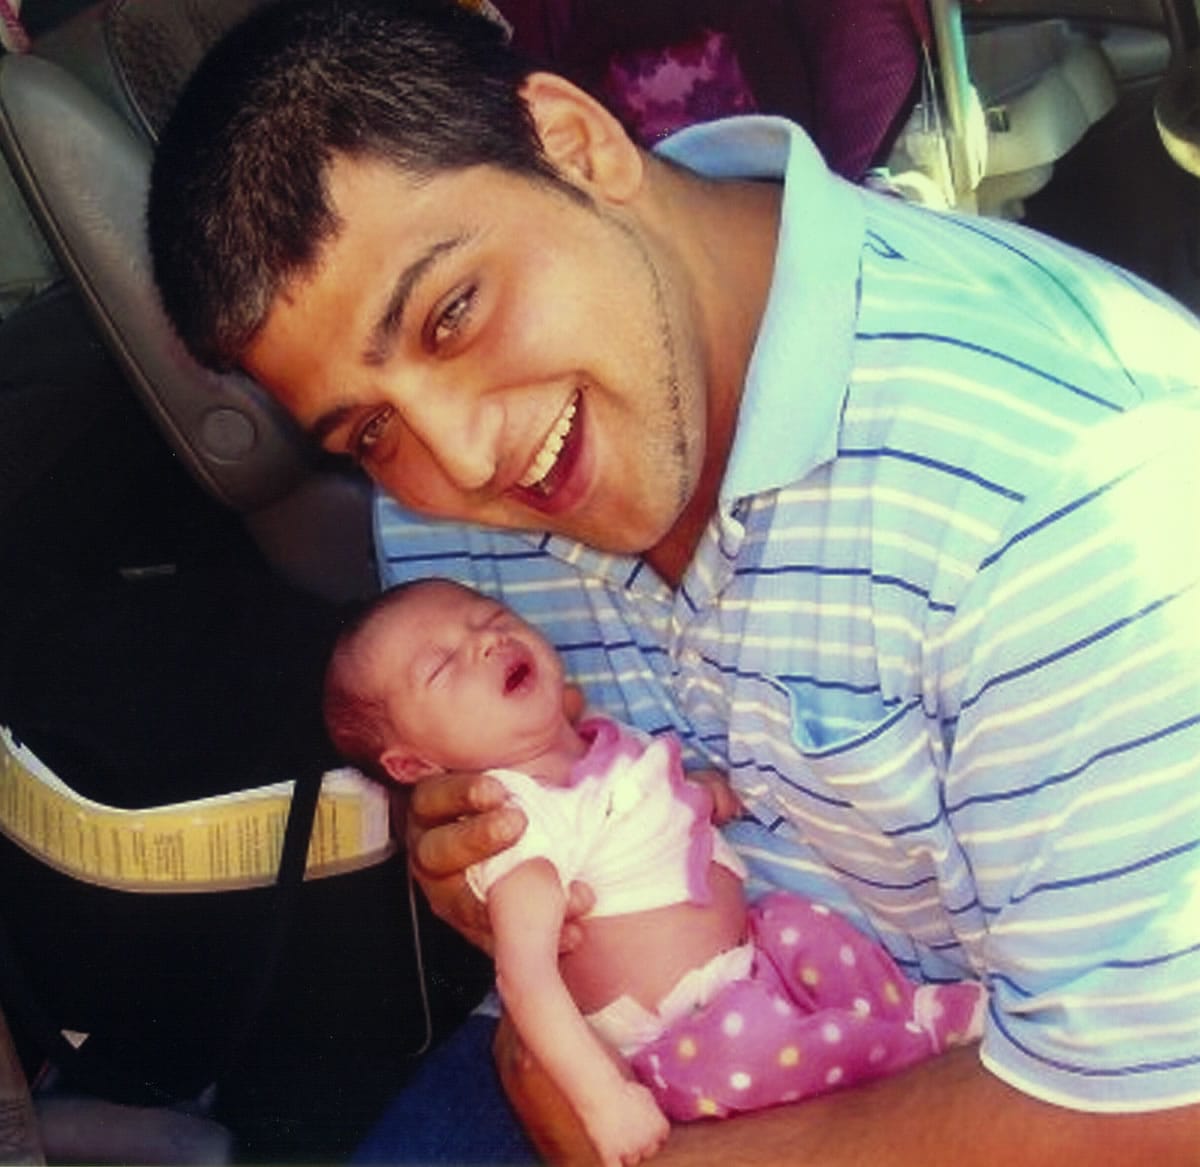 Joshua Schenk, who was killed in 2012, holds his niece, Mirra, in 2009.